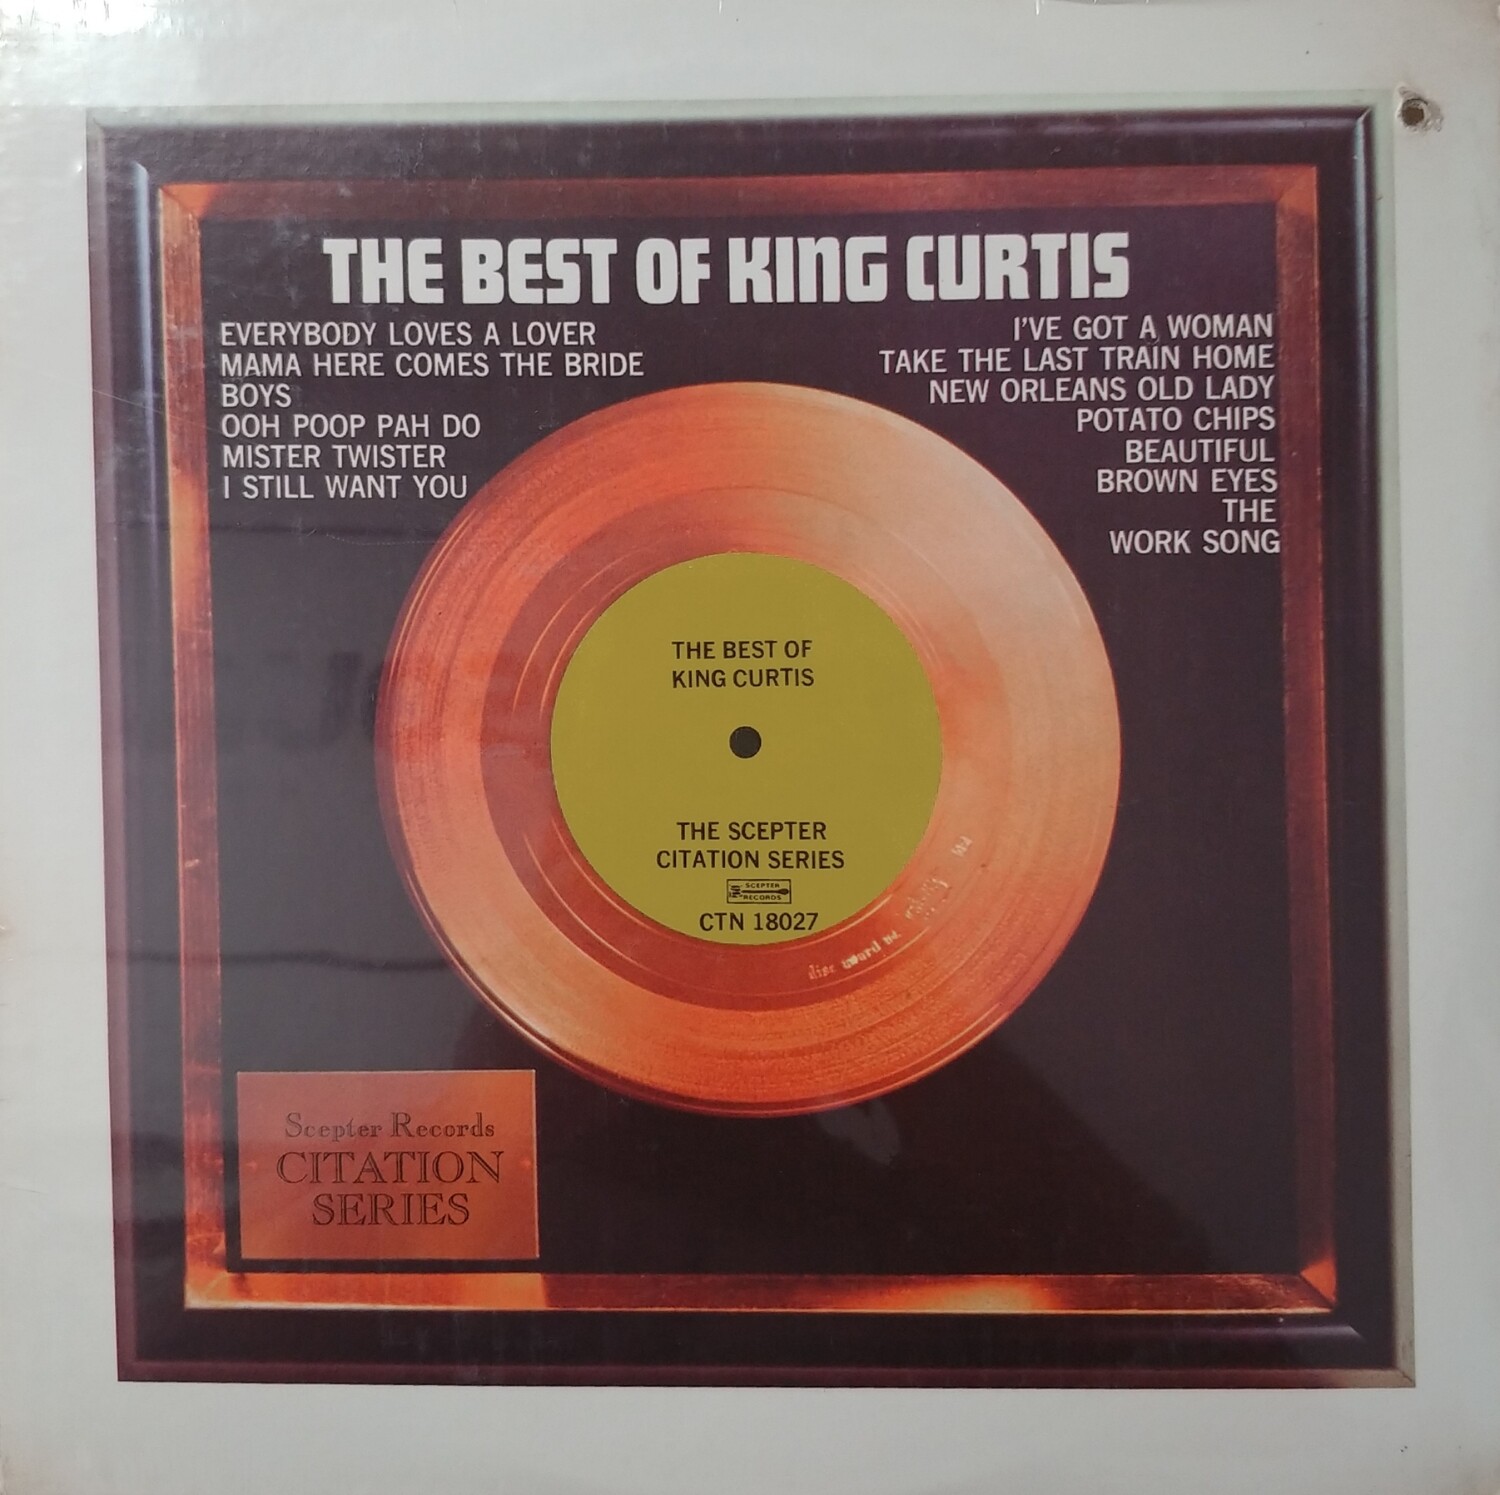 King Curtis - The Best of King Curtis